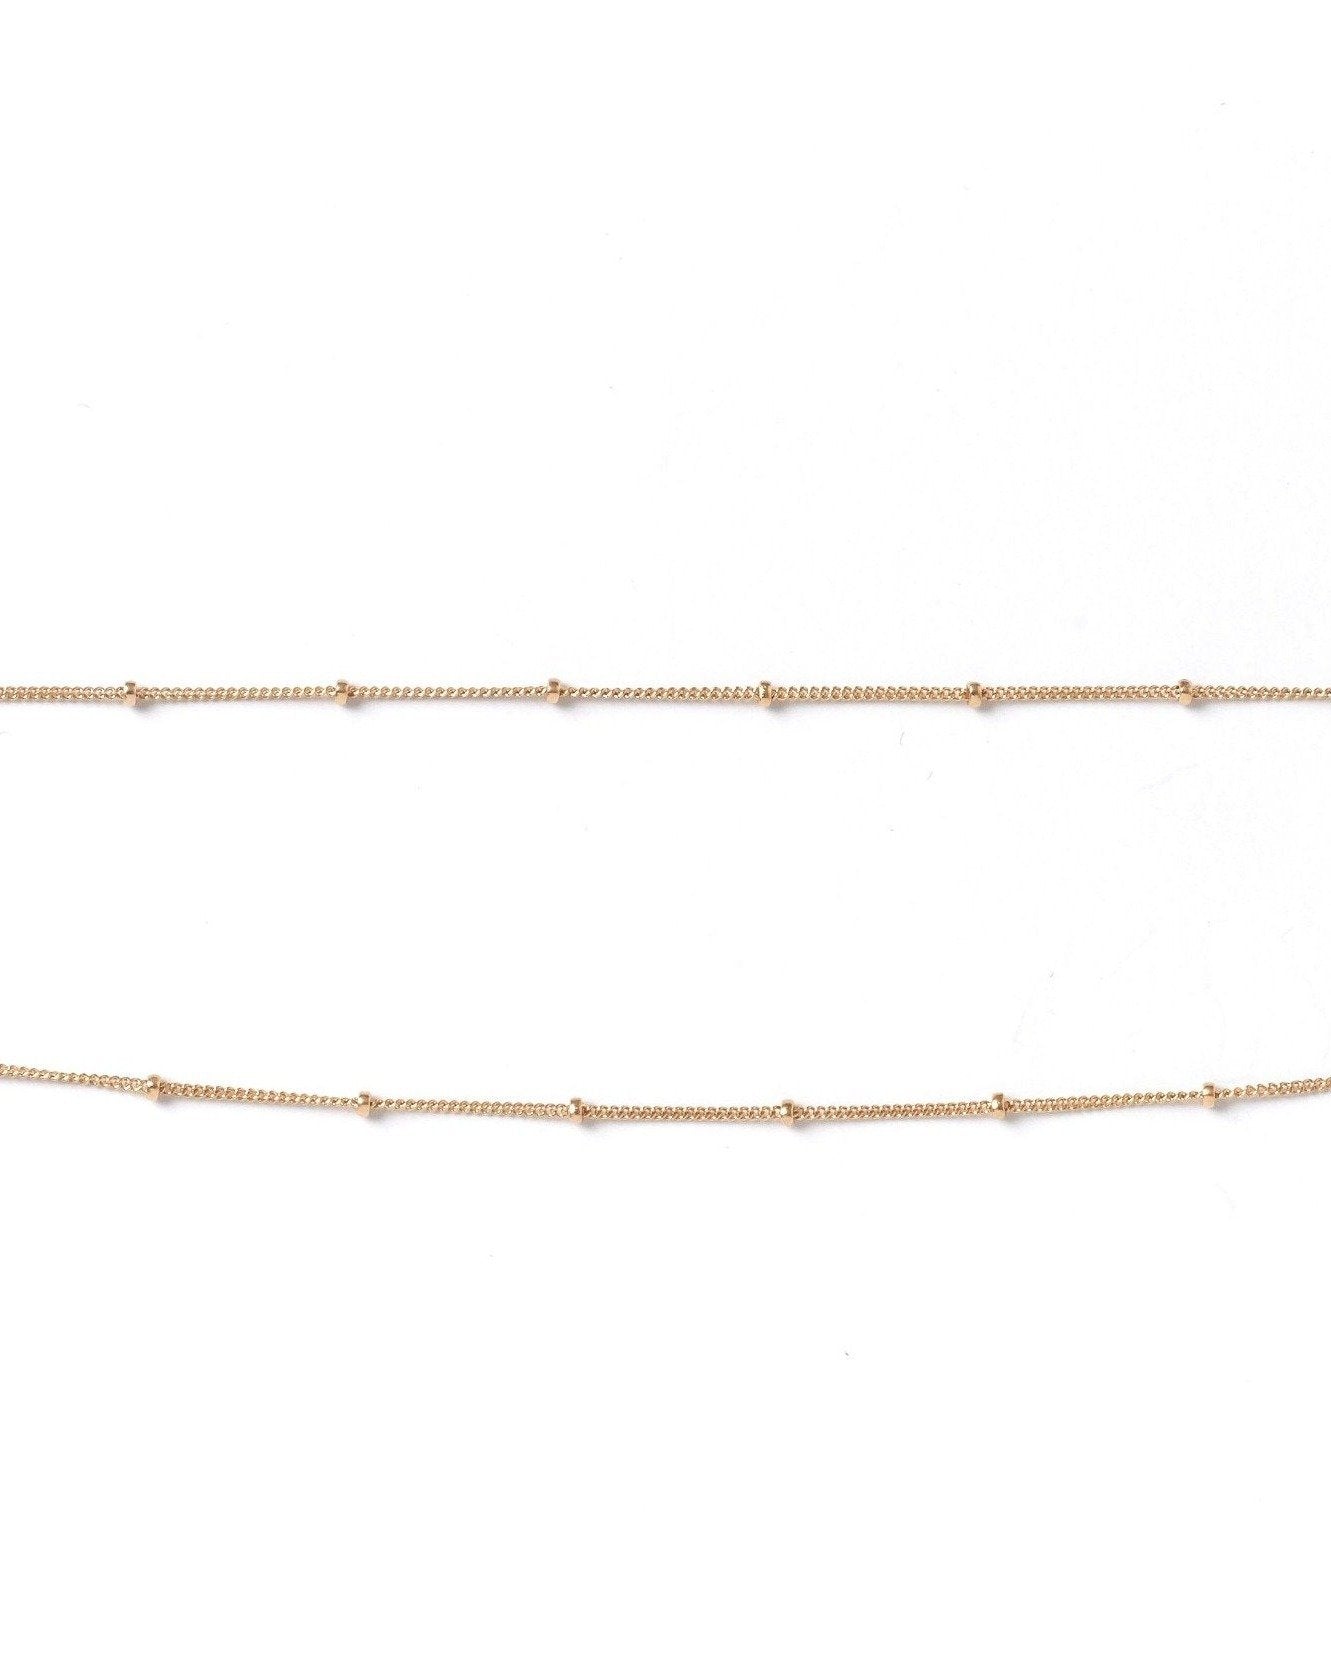 Galas Choker by KOZAKH. A 14 to 16 inch adjustable length double chain style choker necklace in 14K Gold Filled.